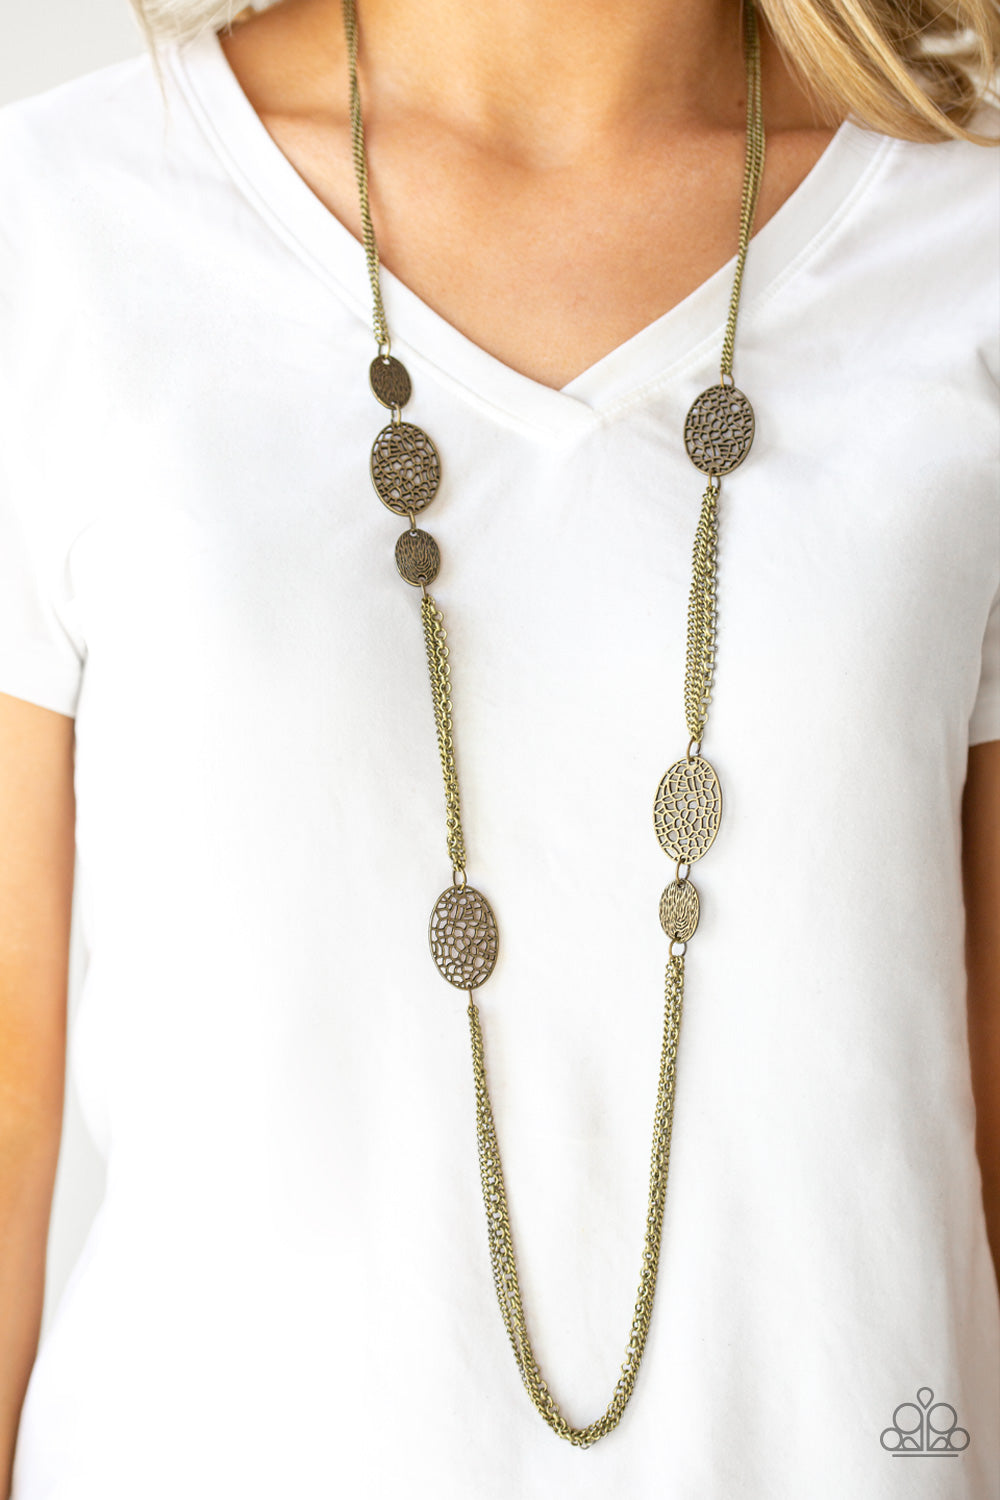 Paparazzi A Force Of Nature - Brass Discs - Necklace & Earrings - $5 Jewelry With Ashley Swint